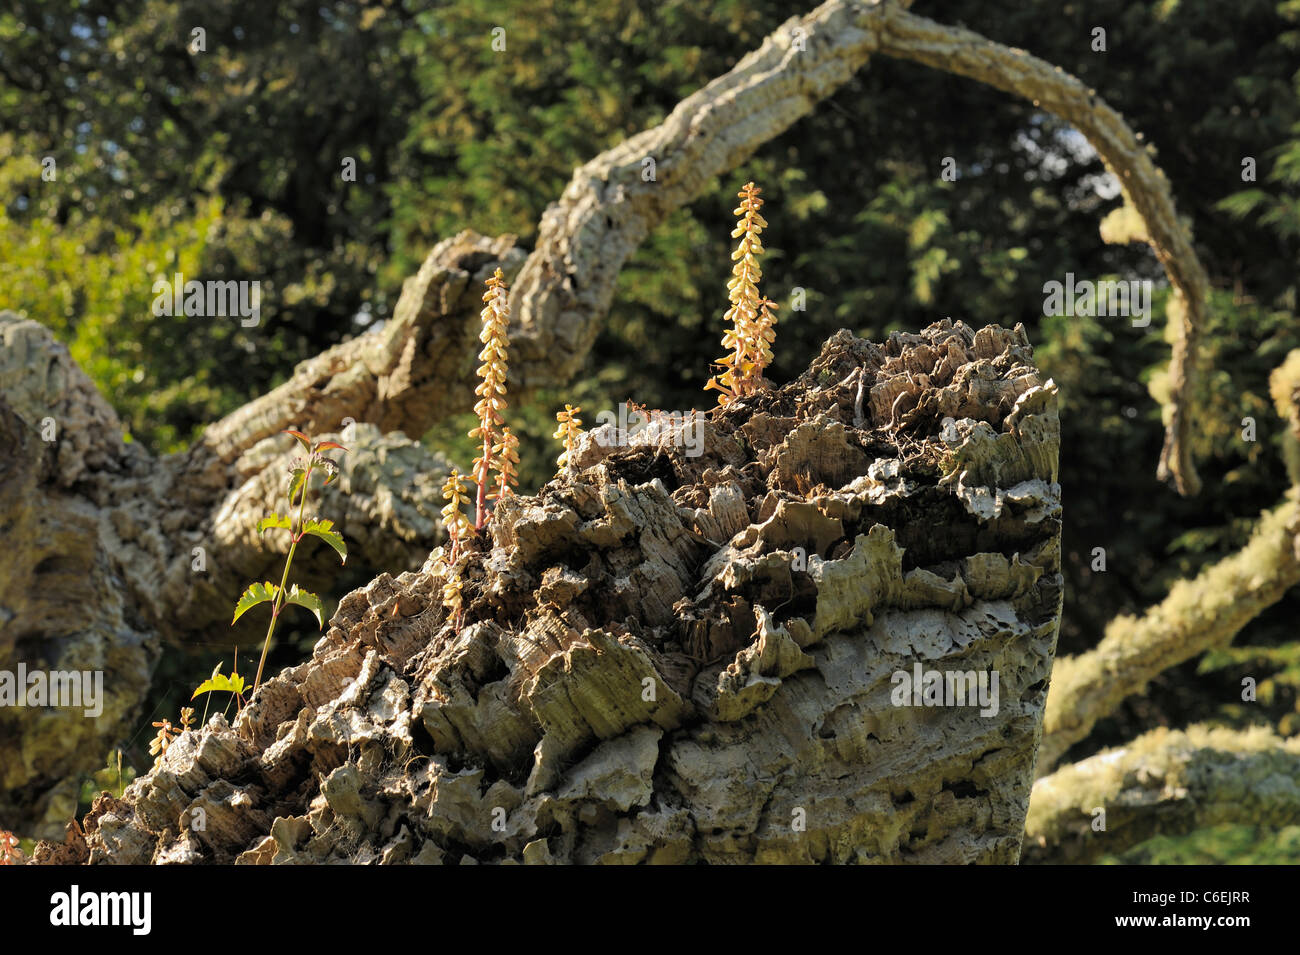 Navelwort (Umbilicus rupestris) growing in the bark of a felled tree Stock Photo